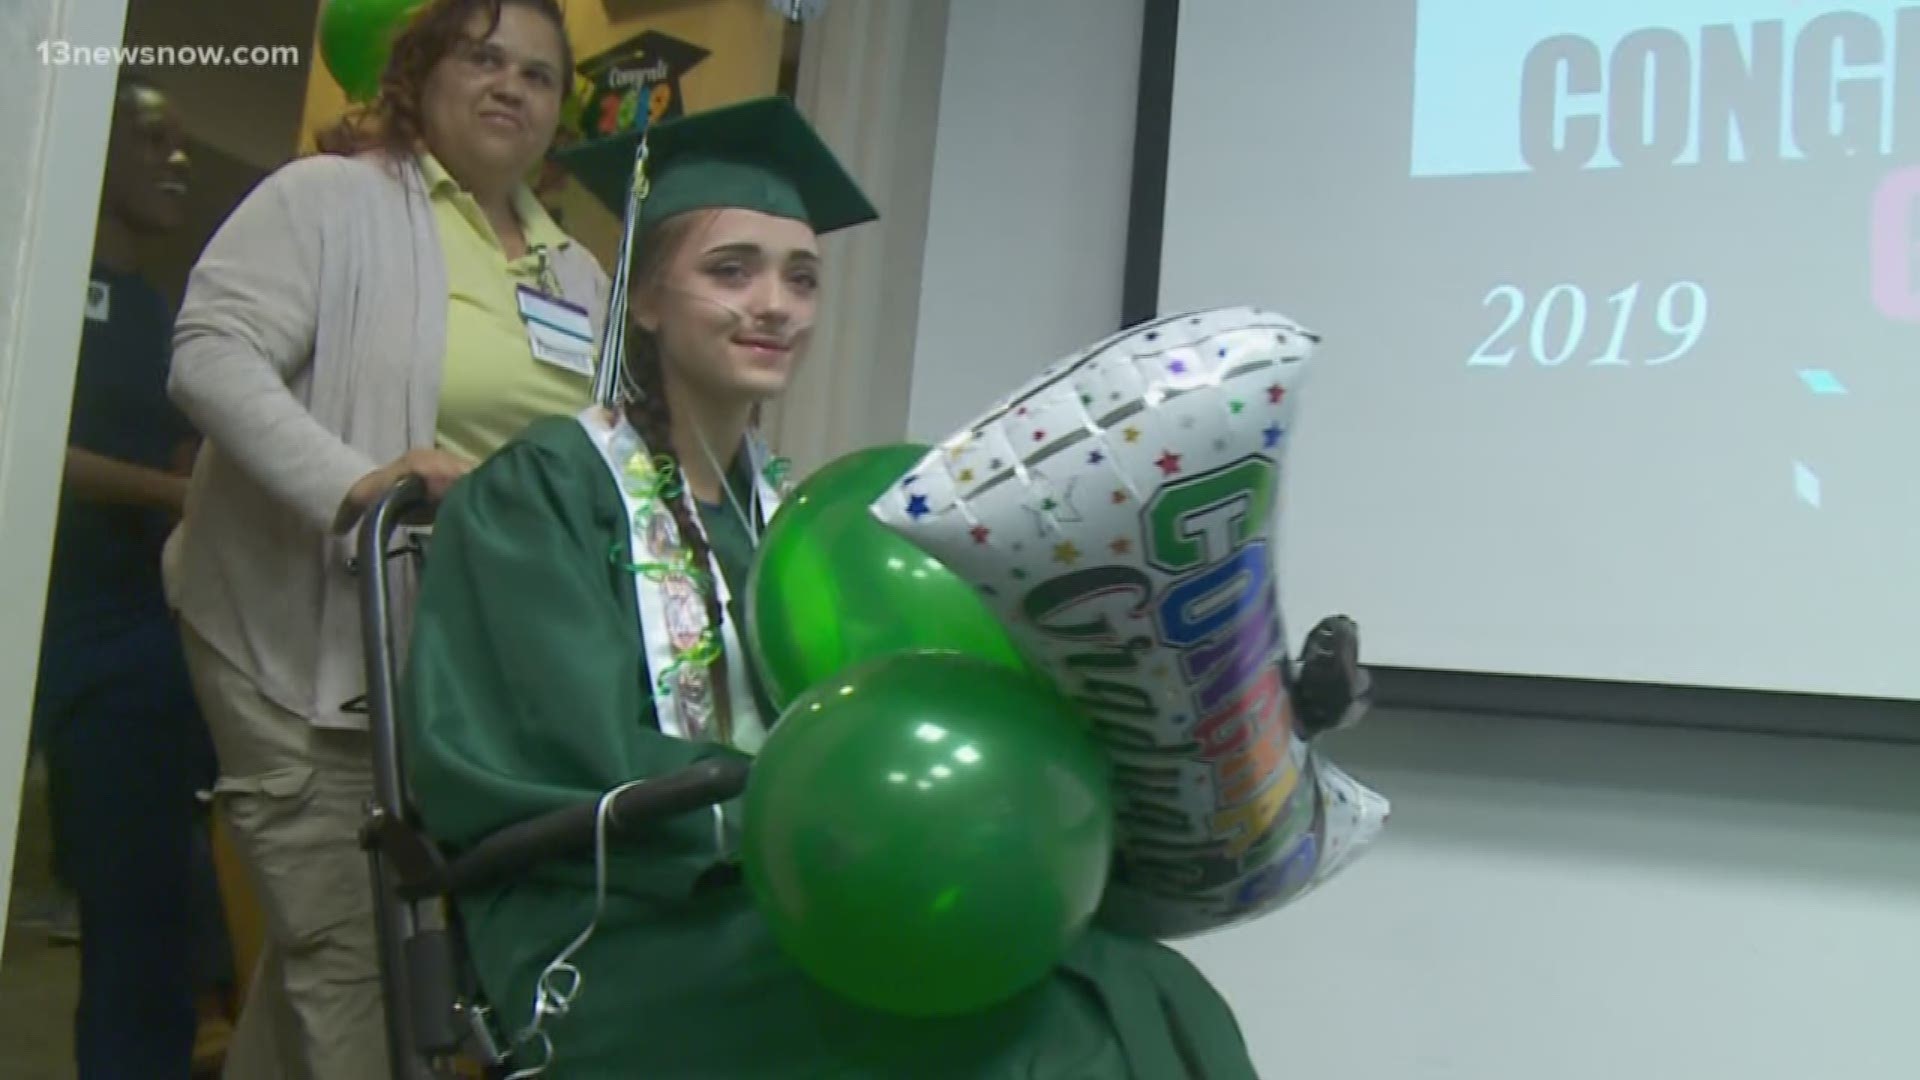 Destiny Cook is a patient at Sentara Careplex Hospital in Hampton dealing with some asthma complications. Because she couldn't make graduation, Kecoughtan High School brought graduation to her.